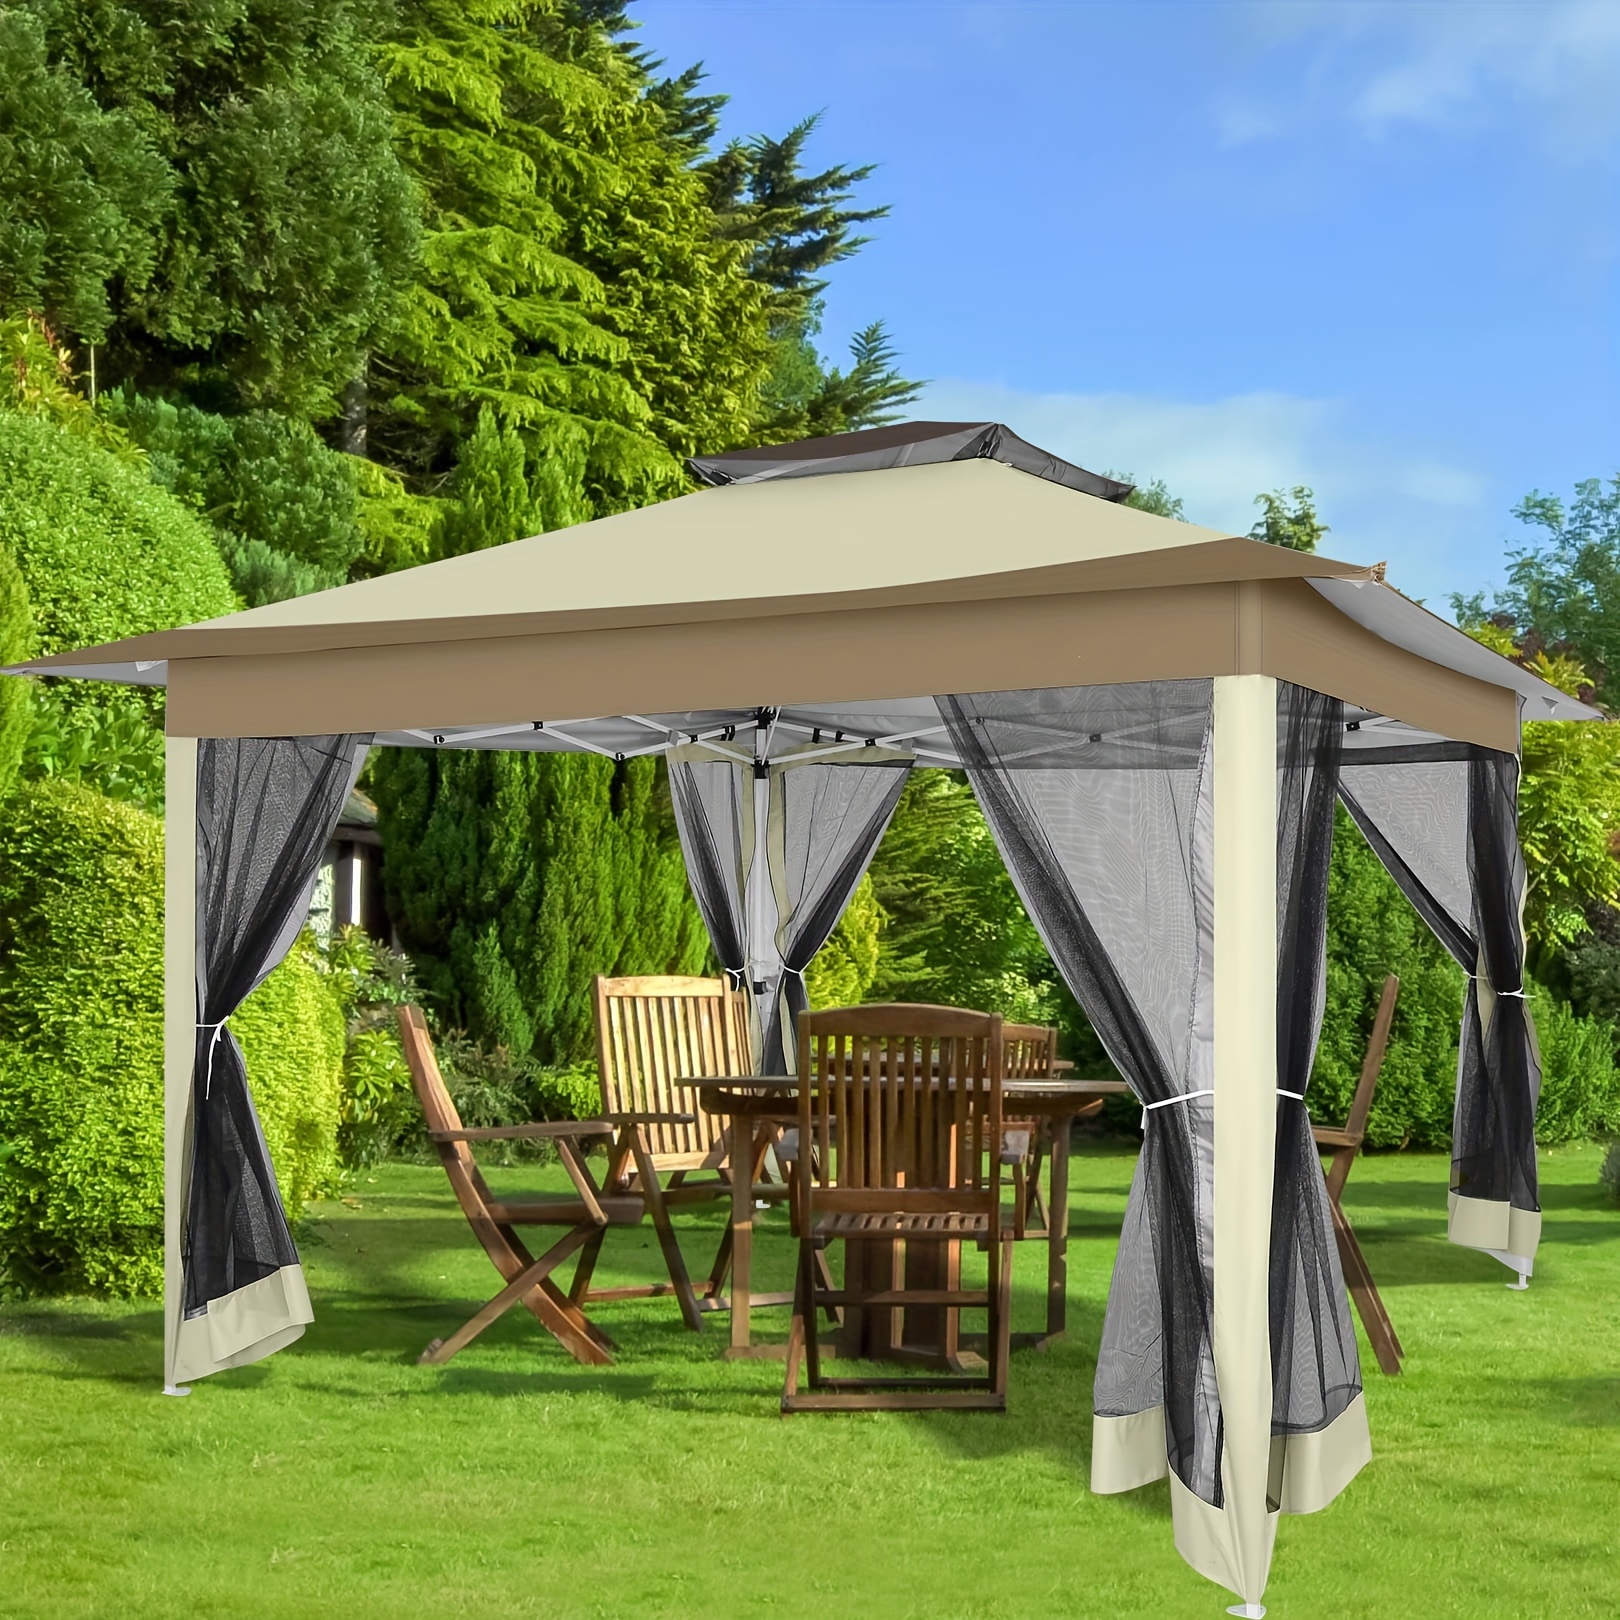 

1pc Pop Up Gazebo, 10x10 Outdoor Gazebo With Mosquito Netting, Patio Gazebo With Sidewalls For Garden, Camping, Parties, And Backyard, With Vented Top, Storage Bag, Sandbags